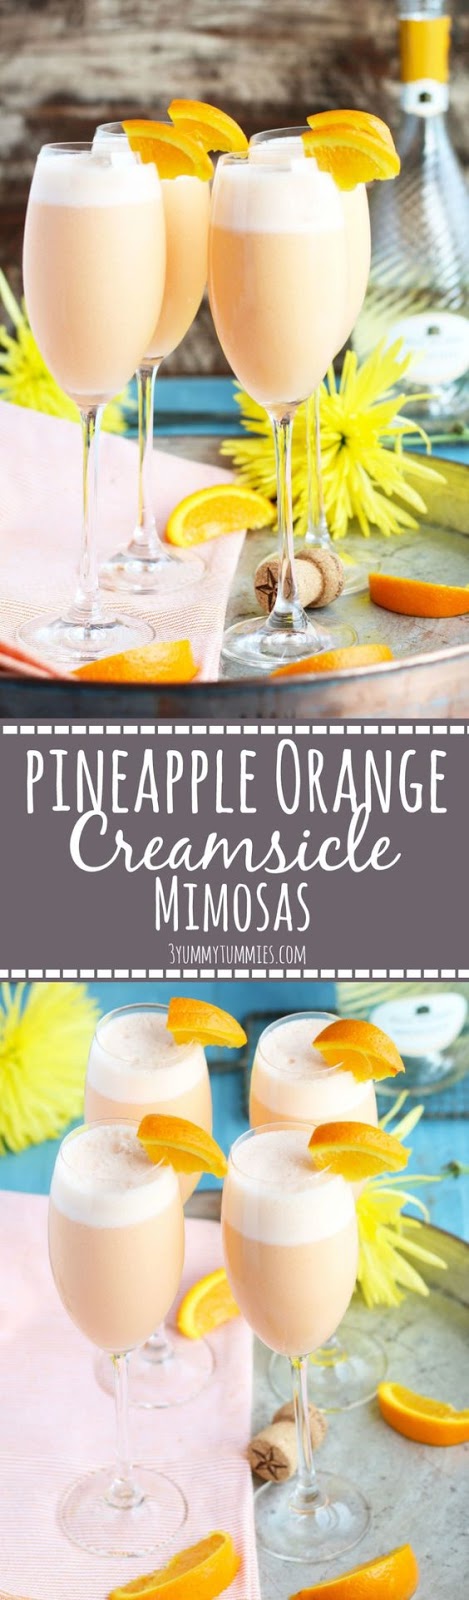 These Pineapple Orange Creamsicle Mimosas are an ethereal blend of pineapple juice, orange sherbet and sparkling Moscato.  Only 3 ingredients transforms the basic mimosas into a creamy, dreamy combination that will wow your guests at your next brunch.  Blending the ingredients together ensures the perfect flavor combination in each sip and tastes just like a...